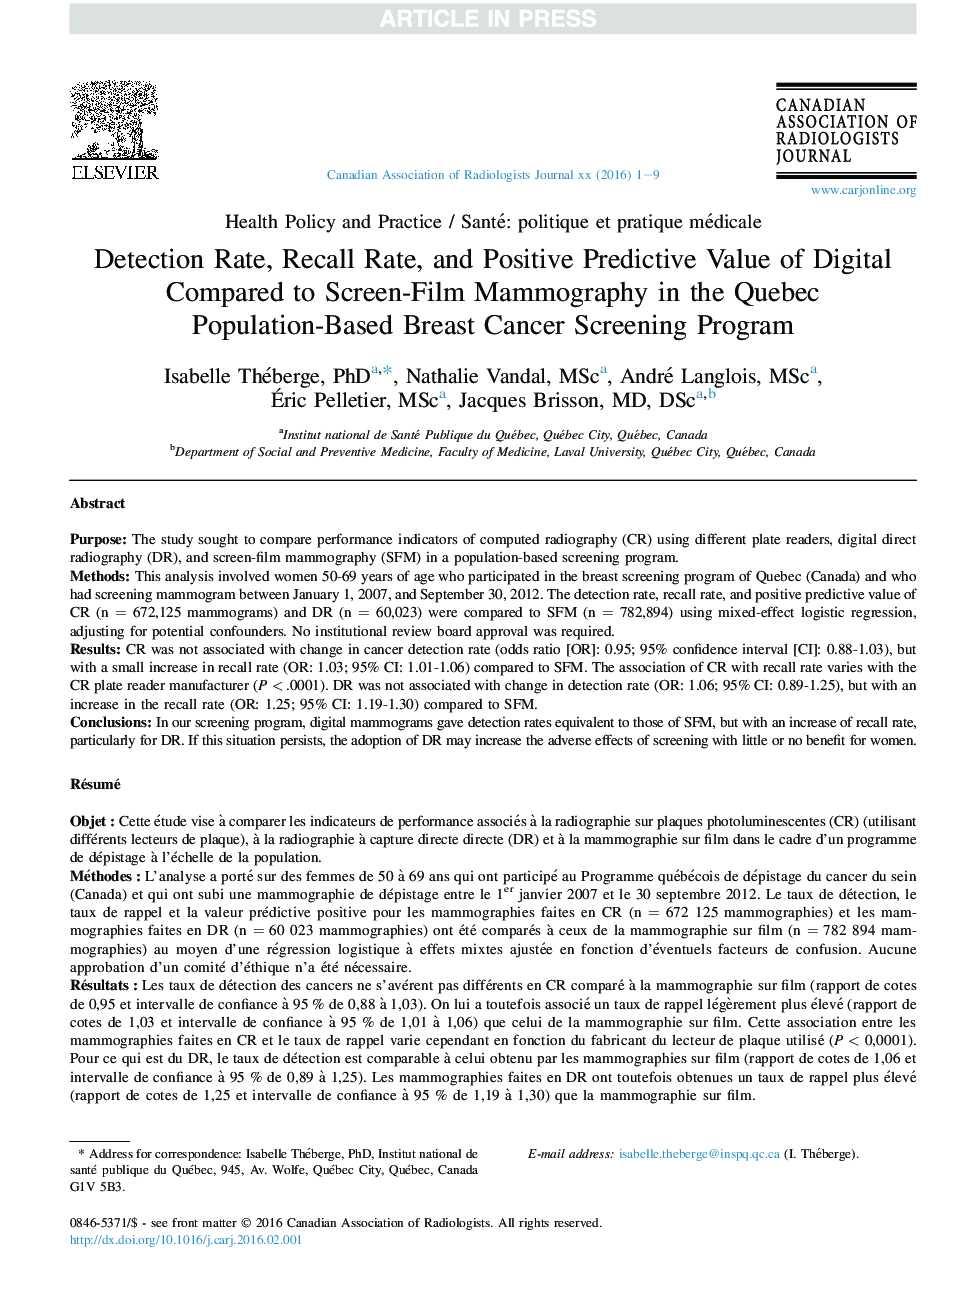 Detection Rate, Recall Rate, and Positive Predictive Value of Digital Compared to Screen-Film Mammography in the Quebec Population-Based Breast Cancer Screening Program